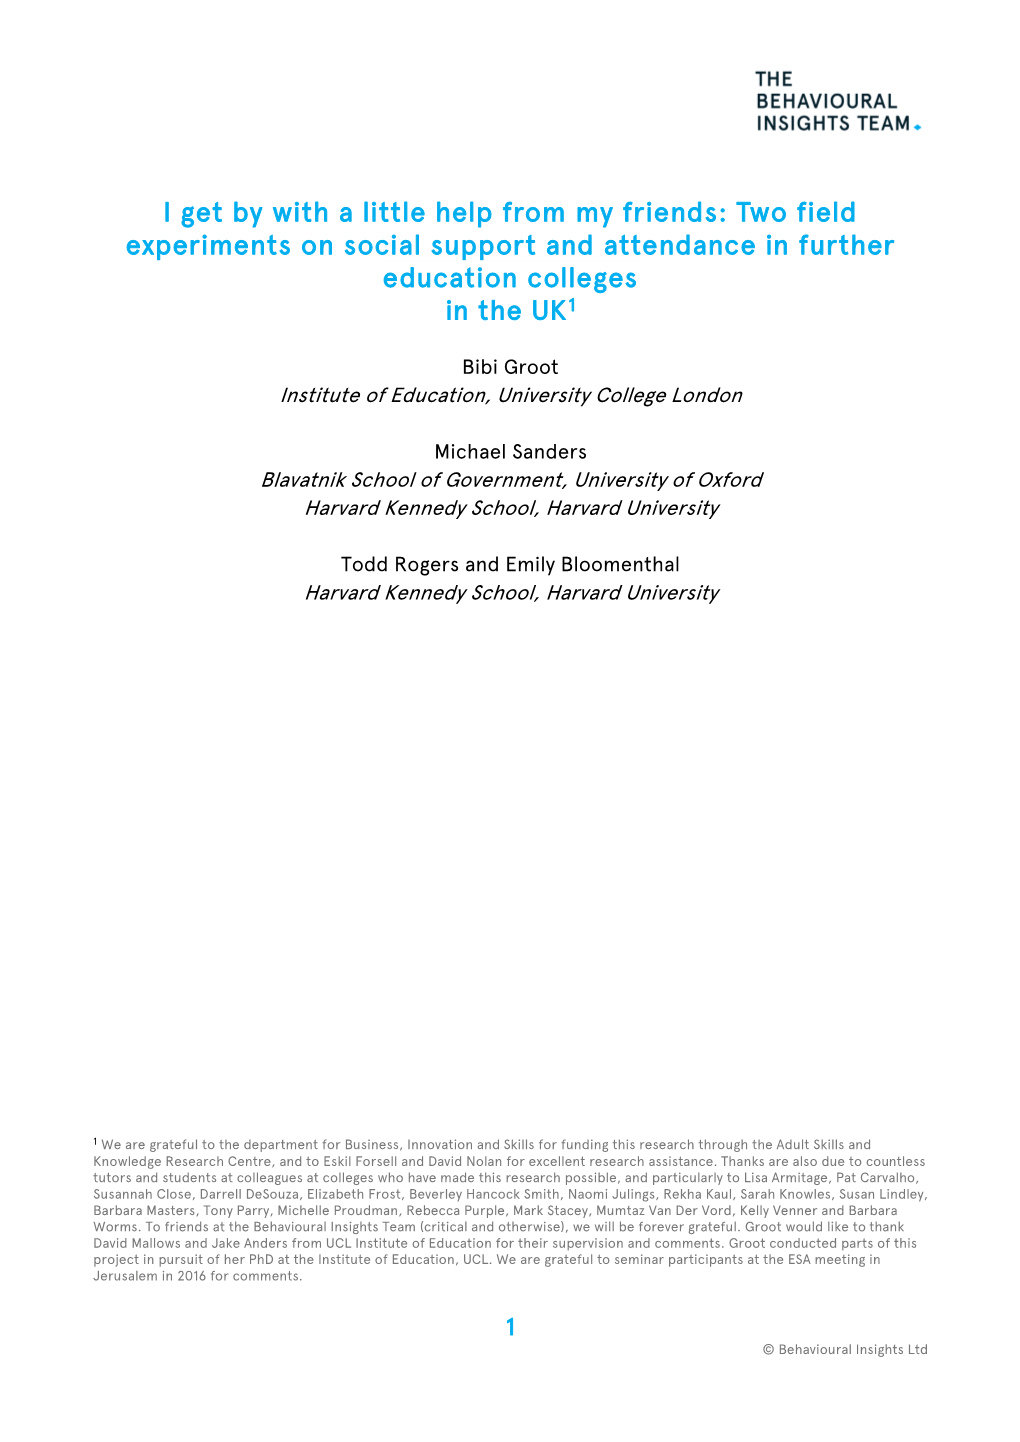 Two Field Experiments on Social Support and Attendance in Further Education Colleges in the UK1